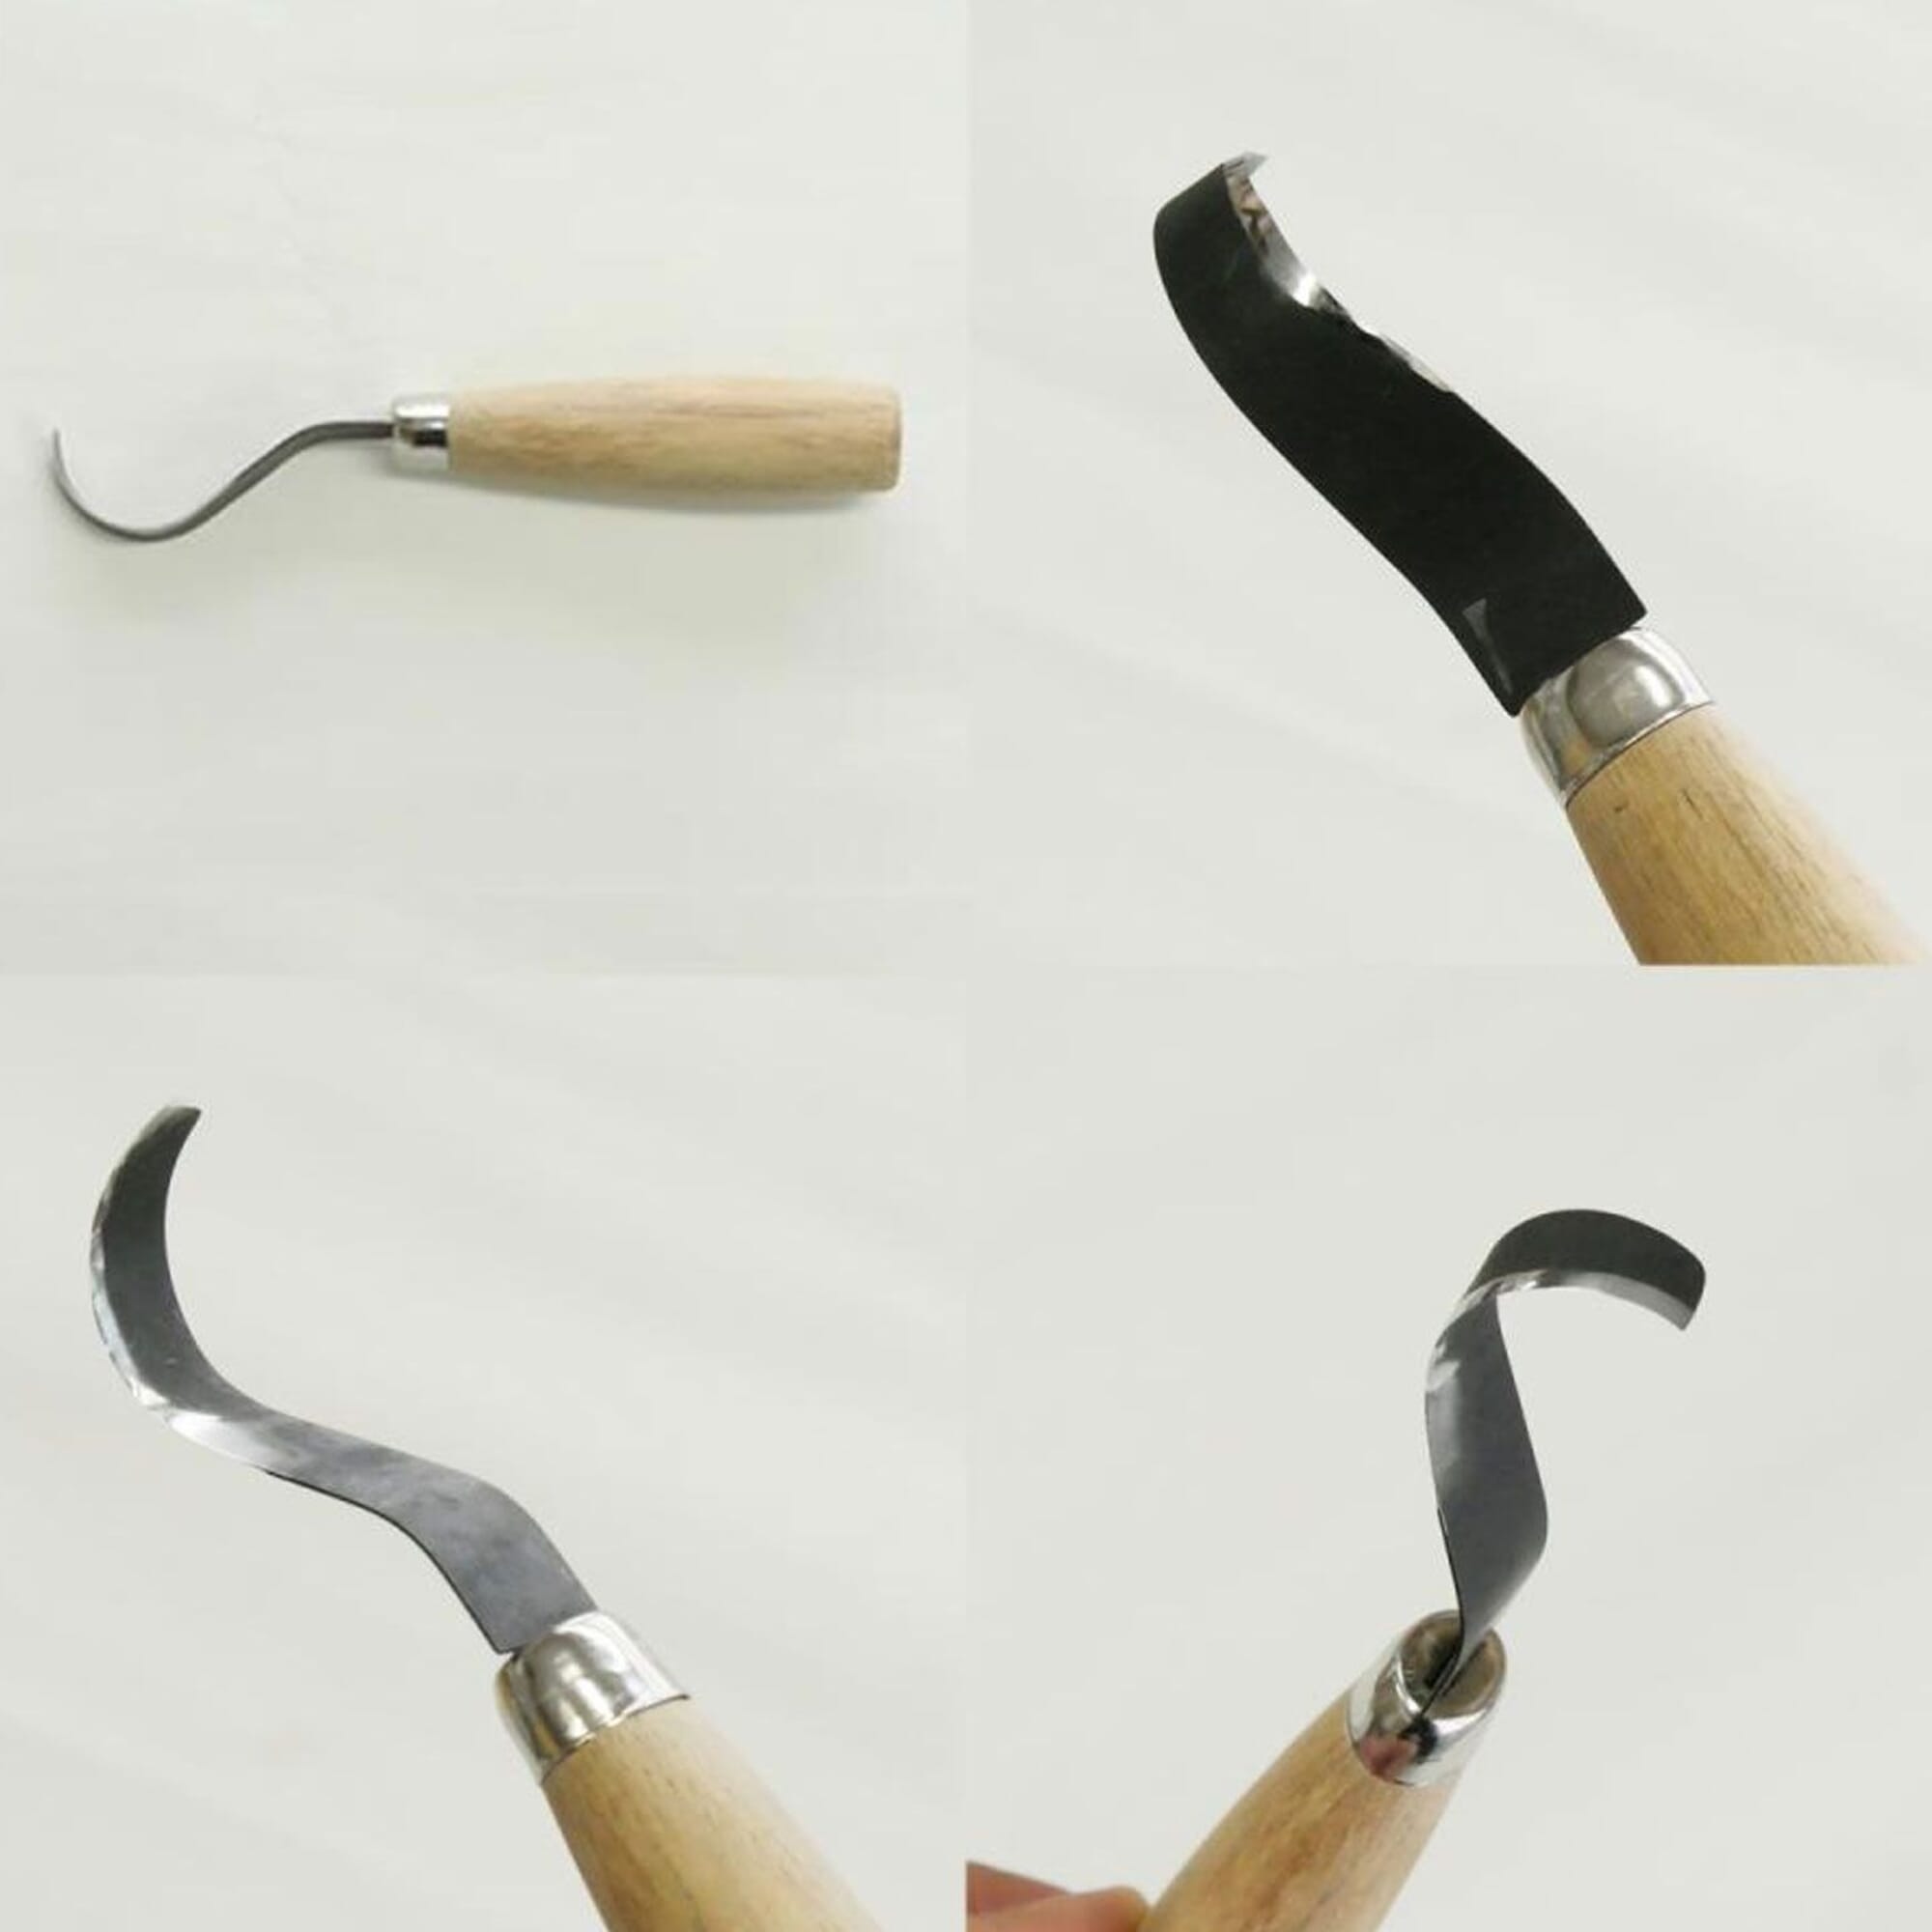 Spoon Carving Hook Knife. Forged Spoon Carving Knife. Knives